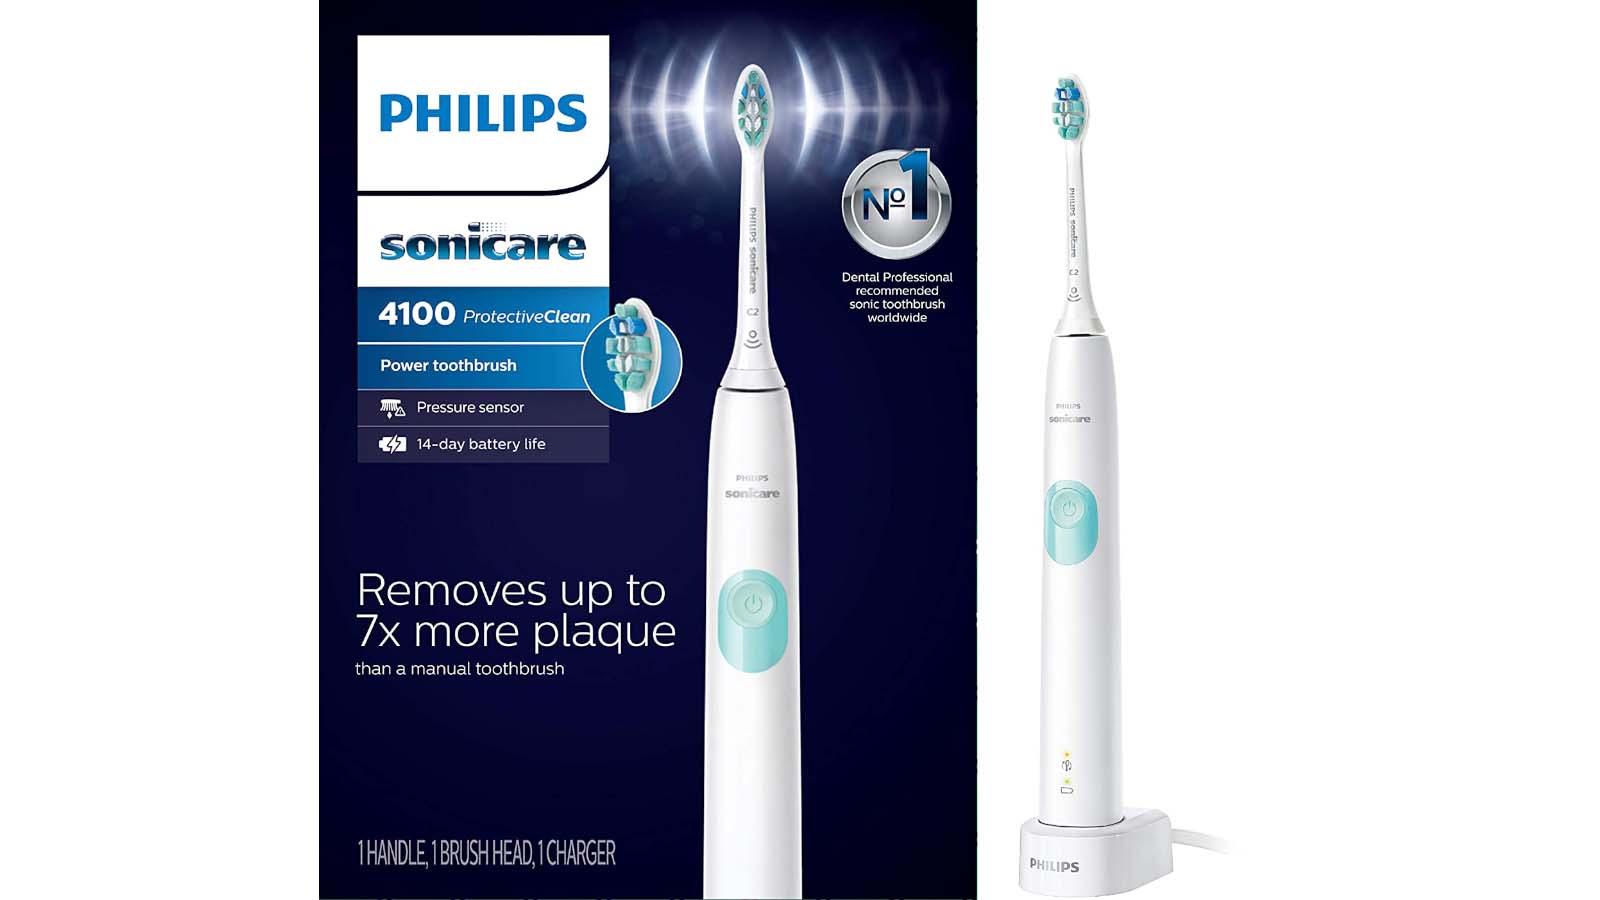 Philips Sonicare ProtectiveClean 4100 (White, HX6817/01) toothbrush and its packaging